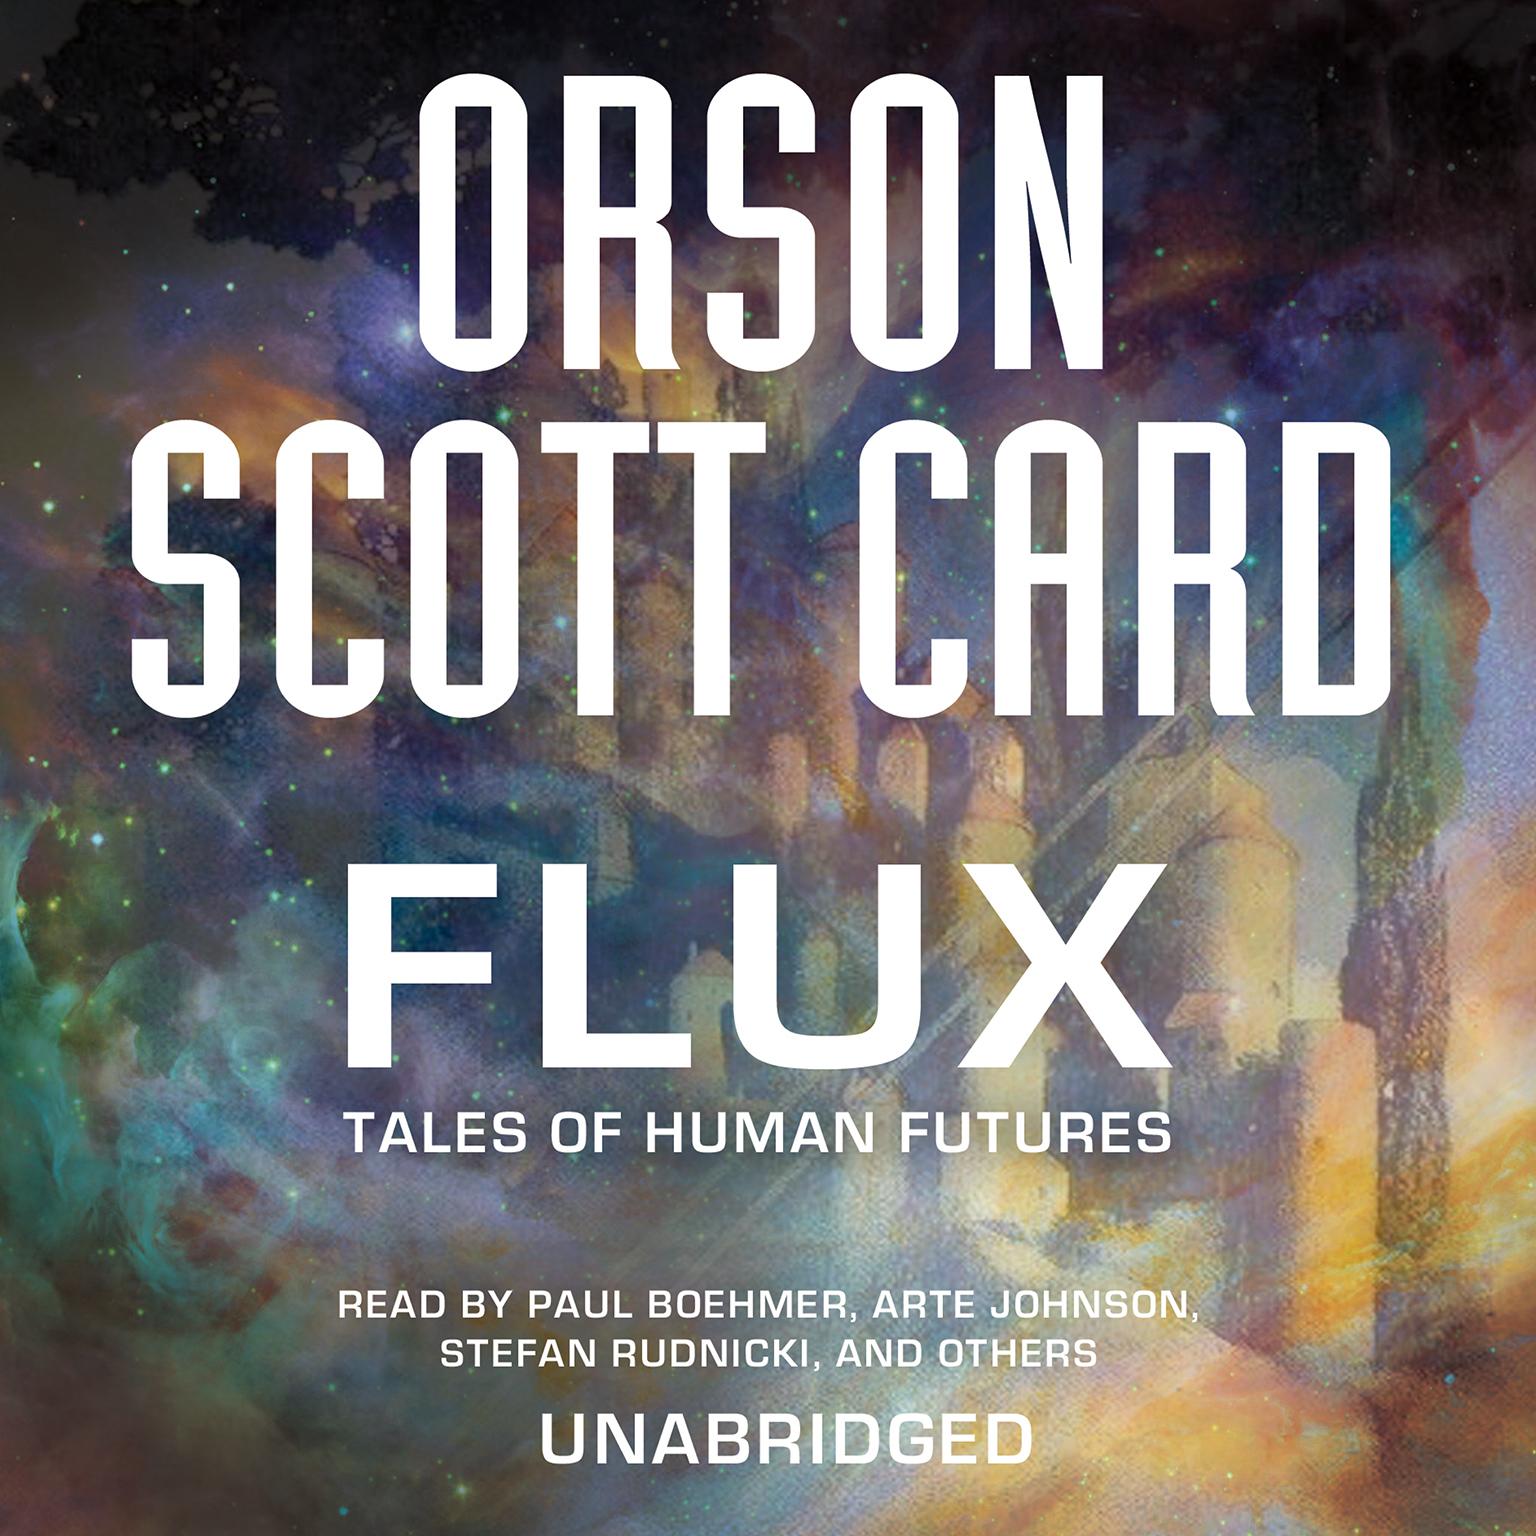 Flux: Tales of Human Futures Audiobook, by Orson Scott Card